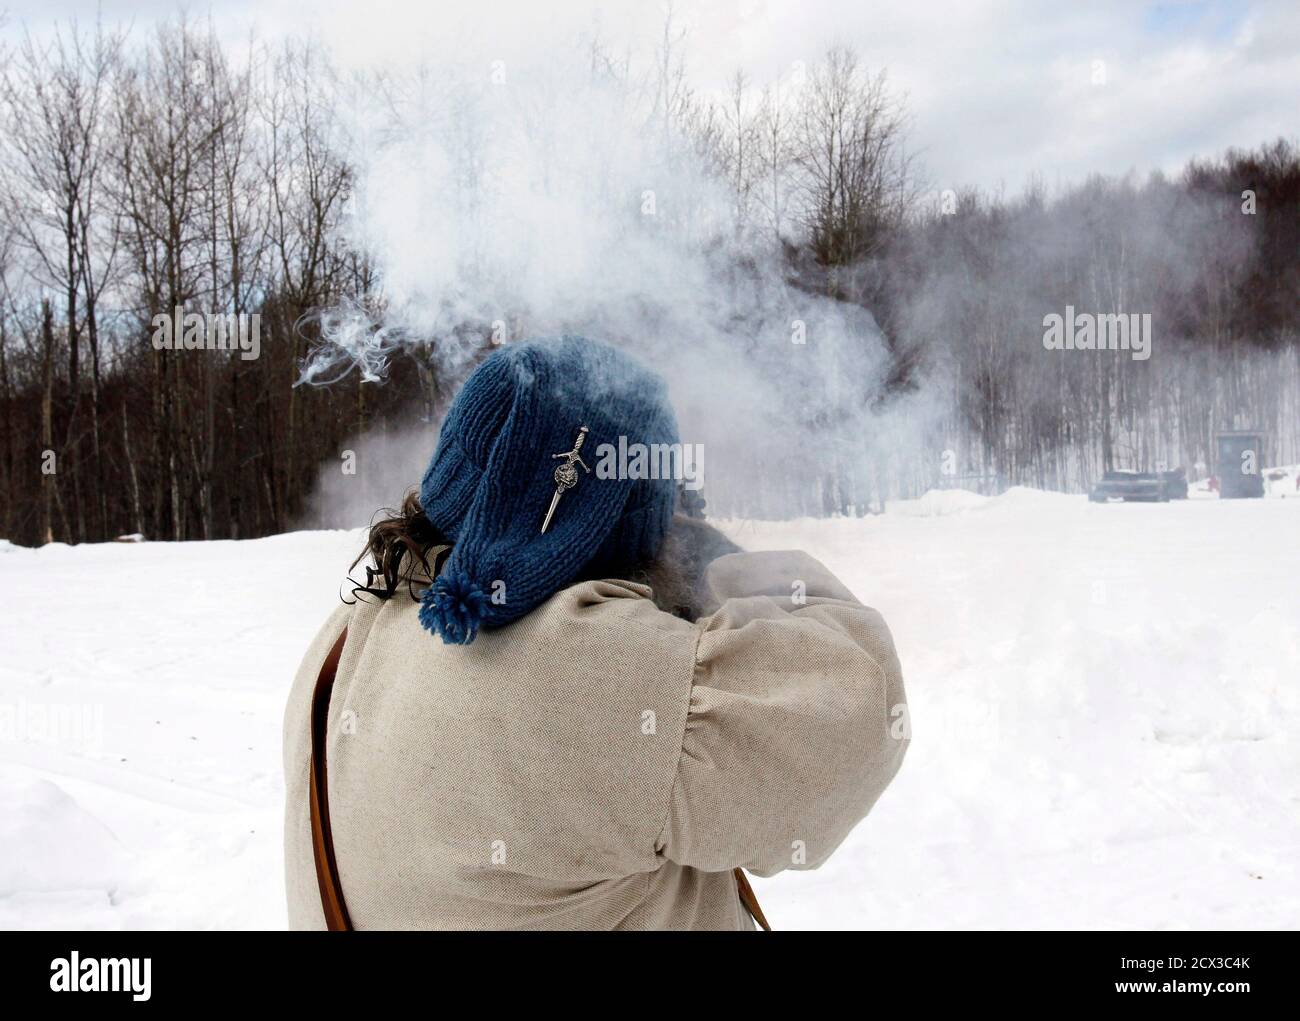 Don Campbell fires at a target as he competes in the Primitive Biathlon in Dalton, New Hampshire February 16, 2013. The Dalton Gang, a single action shooting club, holds the annual Primitive Biathlon in which competitors wear snowshoes and fire single shot muzzle loaded firearms at four stations along a 1.75 mile course. REUTERS/Jessica Rinaldi (UNITED STATES - Tags: SOCIETY SPORT) Stock Photo